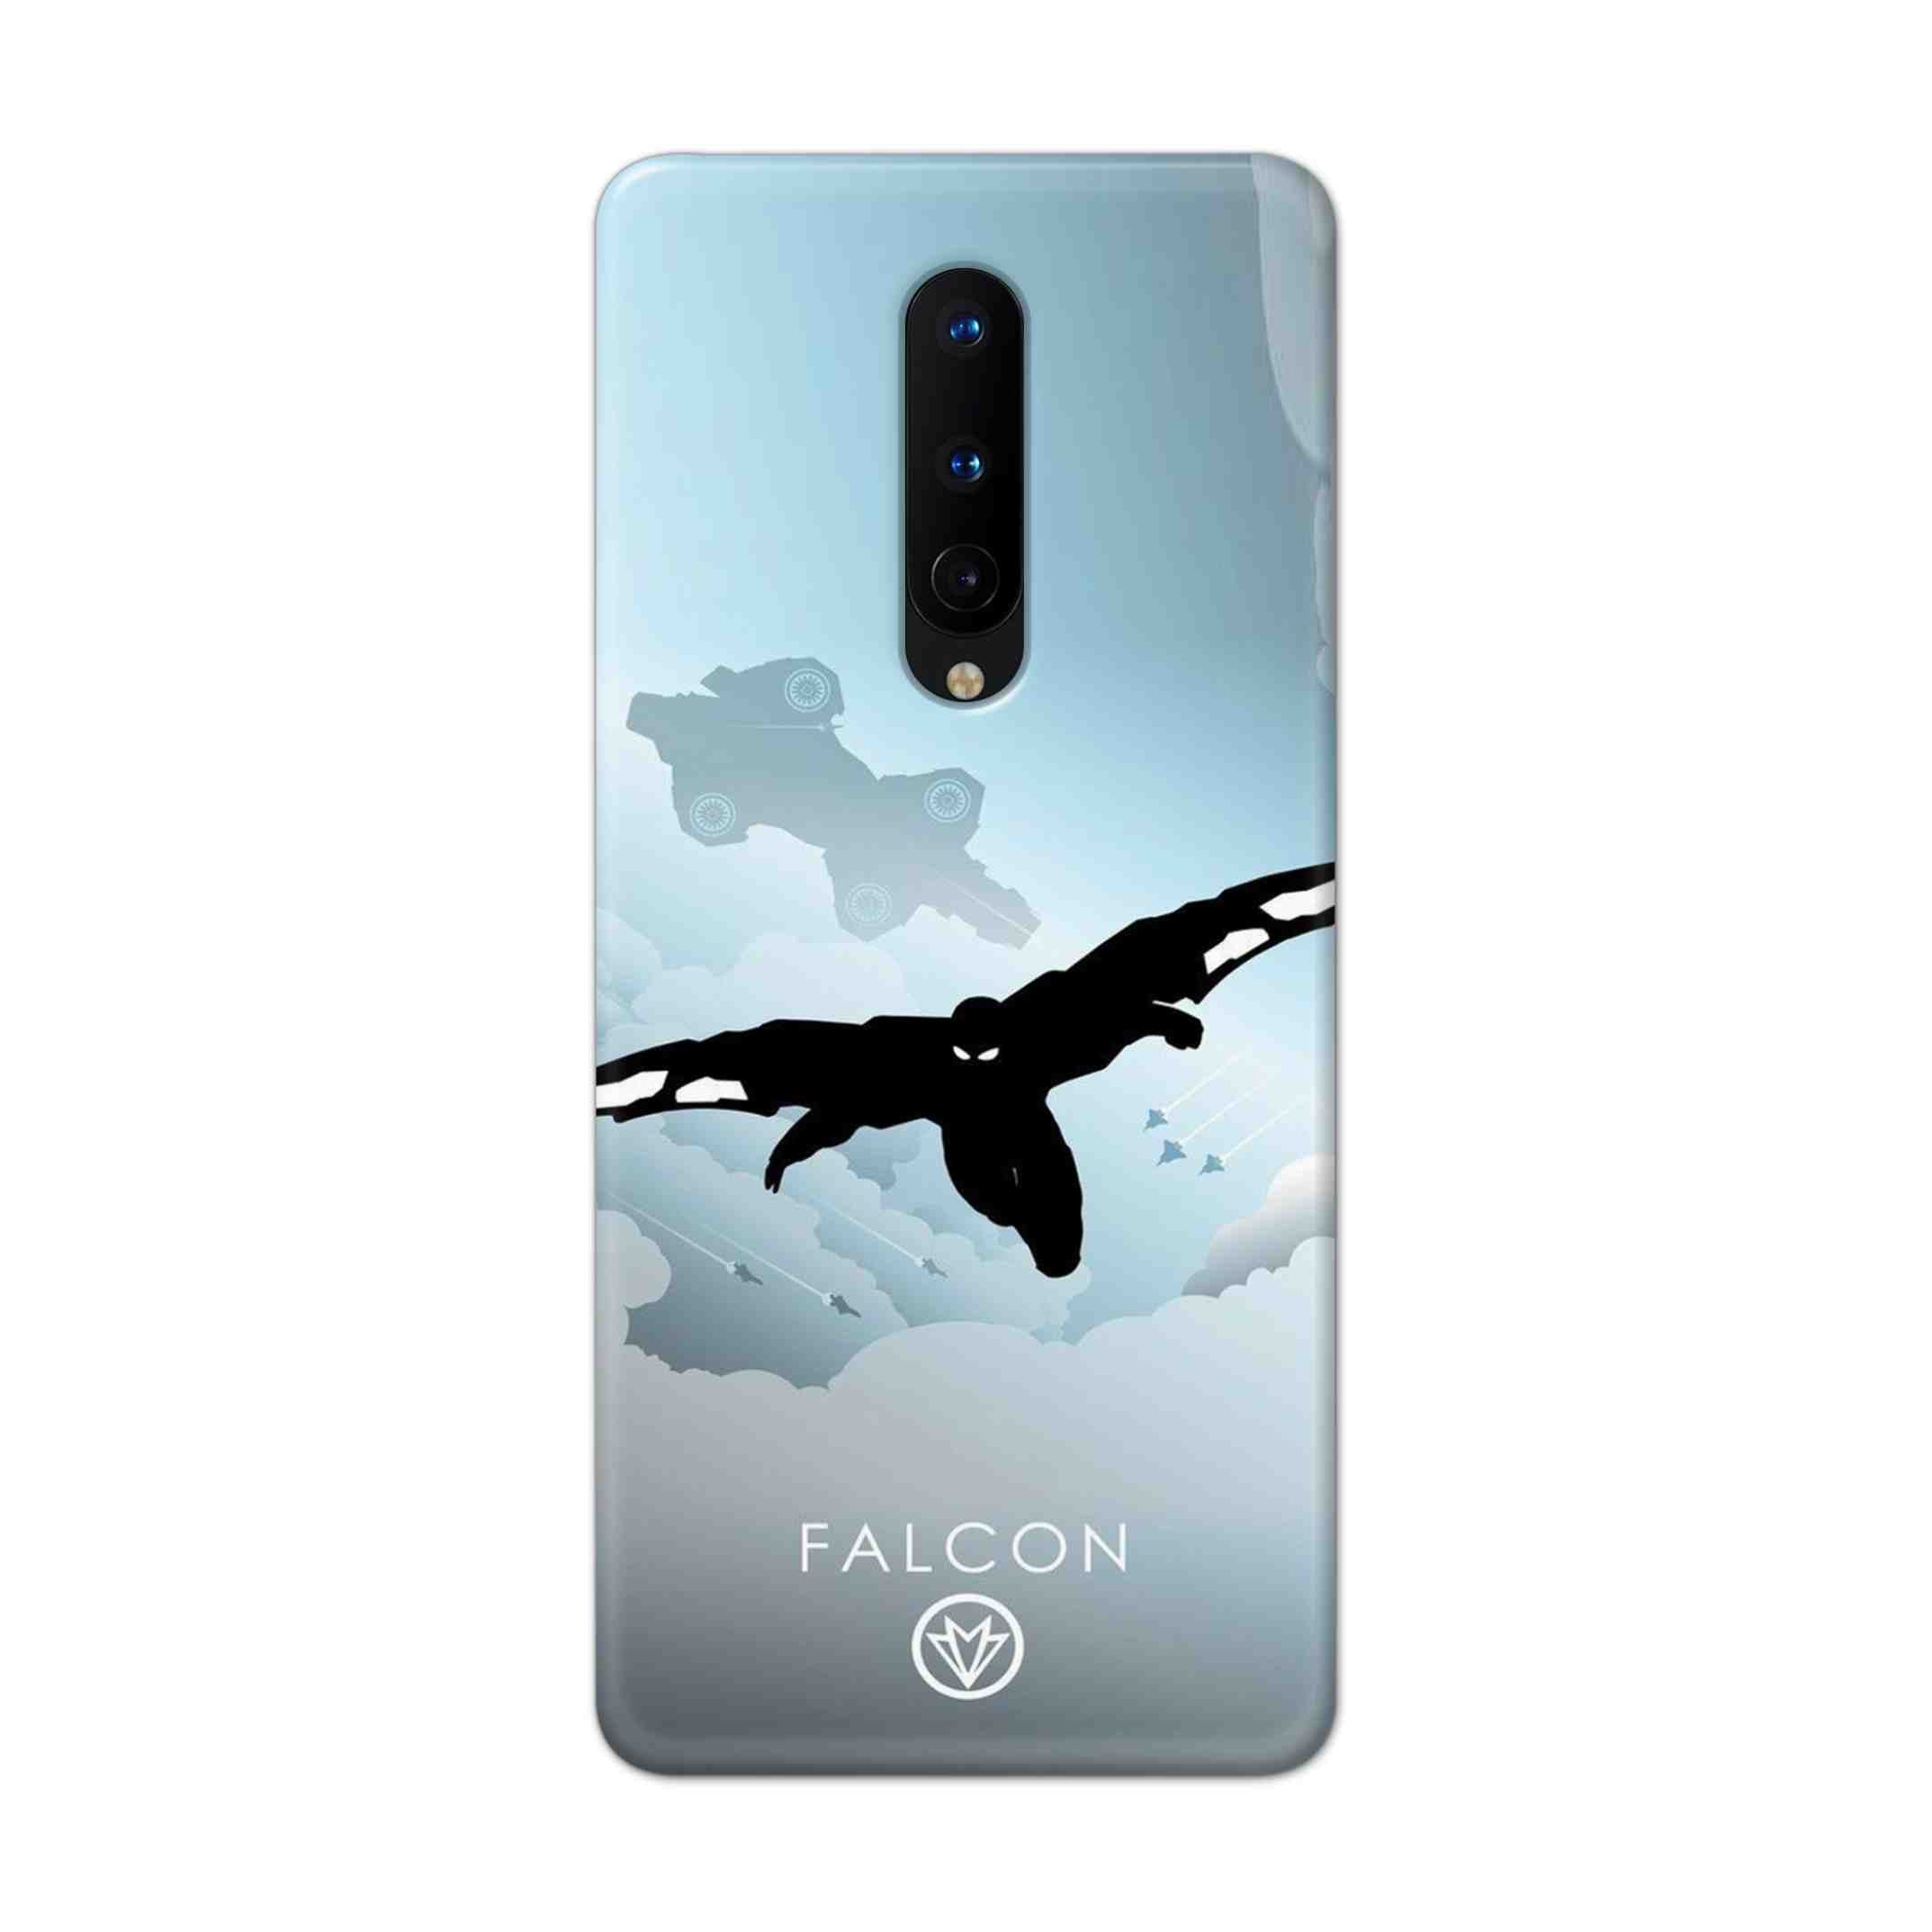 Buy Falcon Hard Back Mobile Phone Case Cover For OnePlus 8 Online